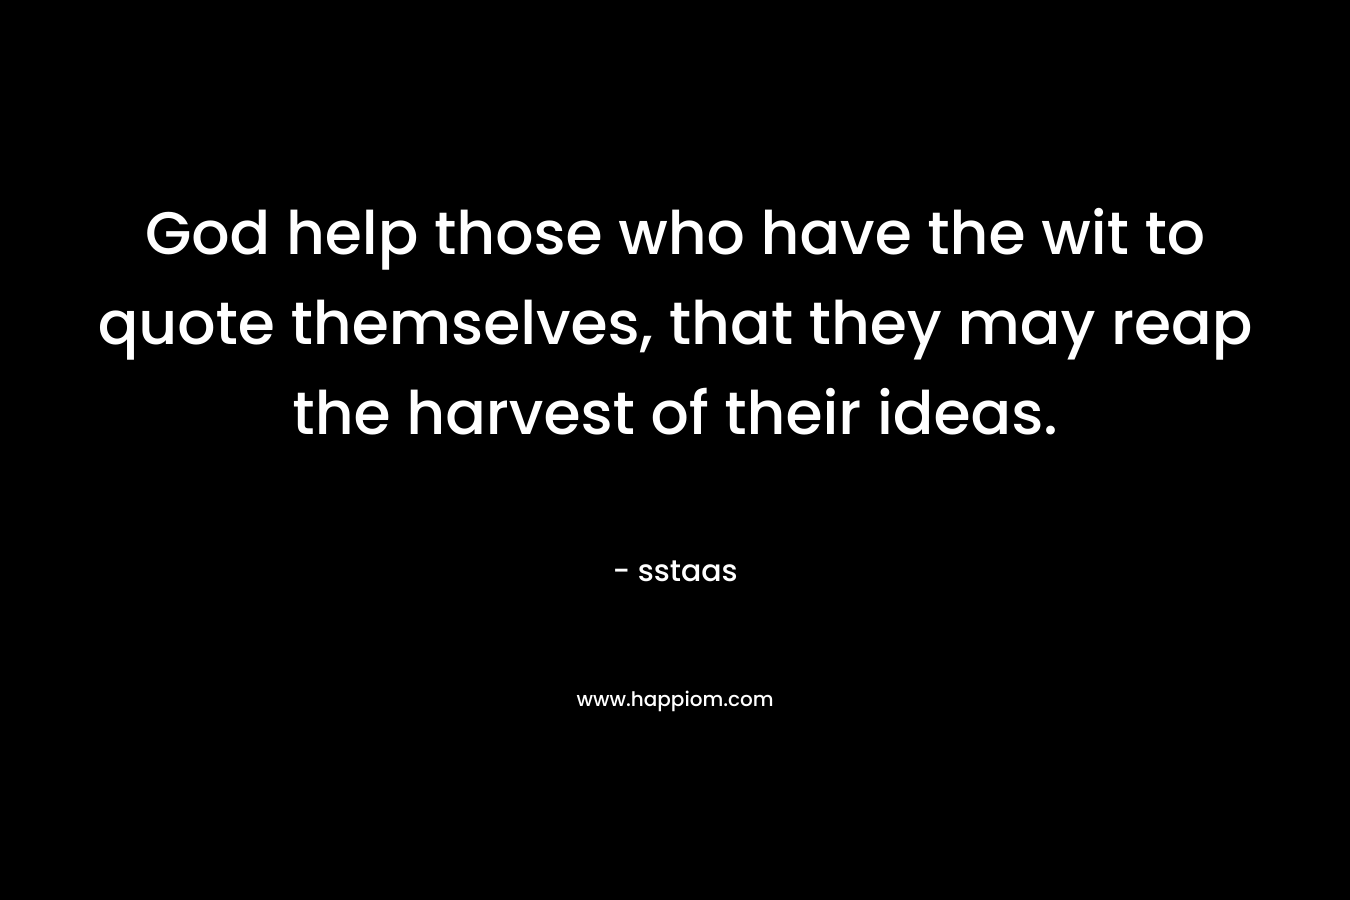 God help those who have the wit to quote themselves, that they may reap the harvest of their ideas. – sstaas